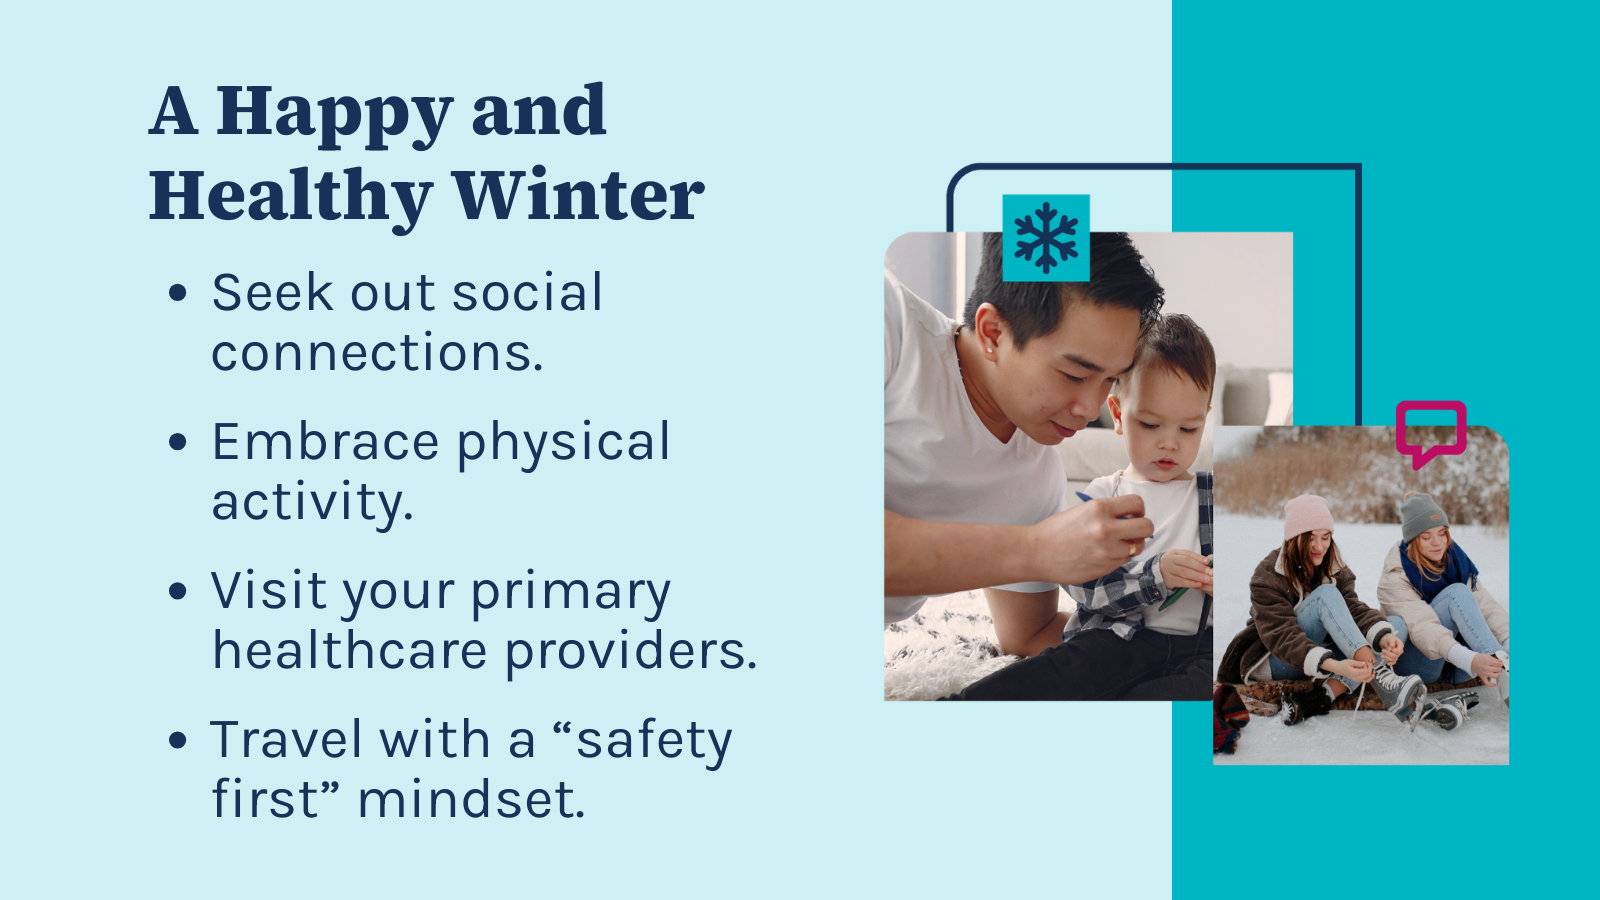 An informational graphic with the title "A Happy and Healthy Winter". It contains a list of suggestions to maintain well-being during the winter season:  Seek out social connections. Embrace physical activity. Visit your primary healthcare providers. Travel with a "safety first" mindset. On the right side of the graphic, there are two photographs within blue frames. The larger image shows an adult and a young child engaged in an activity together, possibly drawing or writing. The smaller photo captures two individuals sitting on a sled in the snow, suggesting outdoor winter activities. The graphic uses a cool blue color scheme that fits the winter theme and places emphasis on health and safety during the colder months.